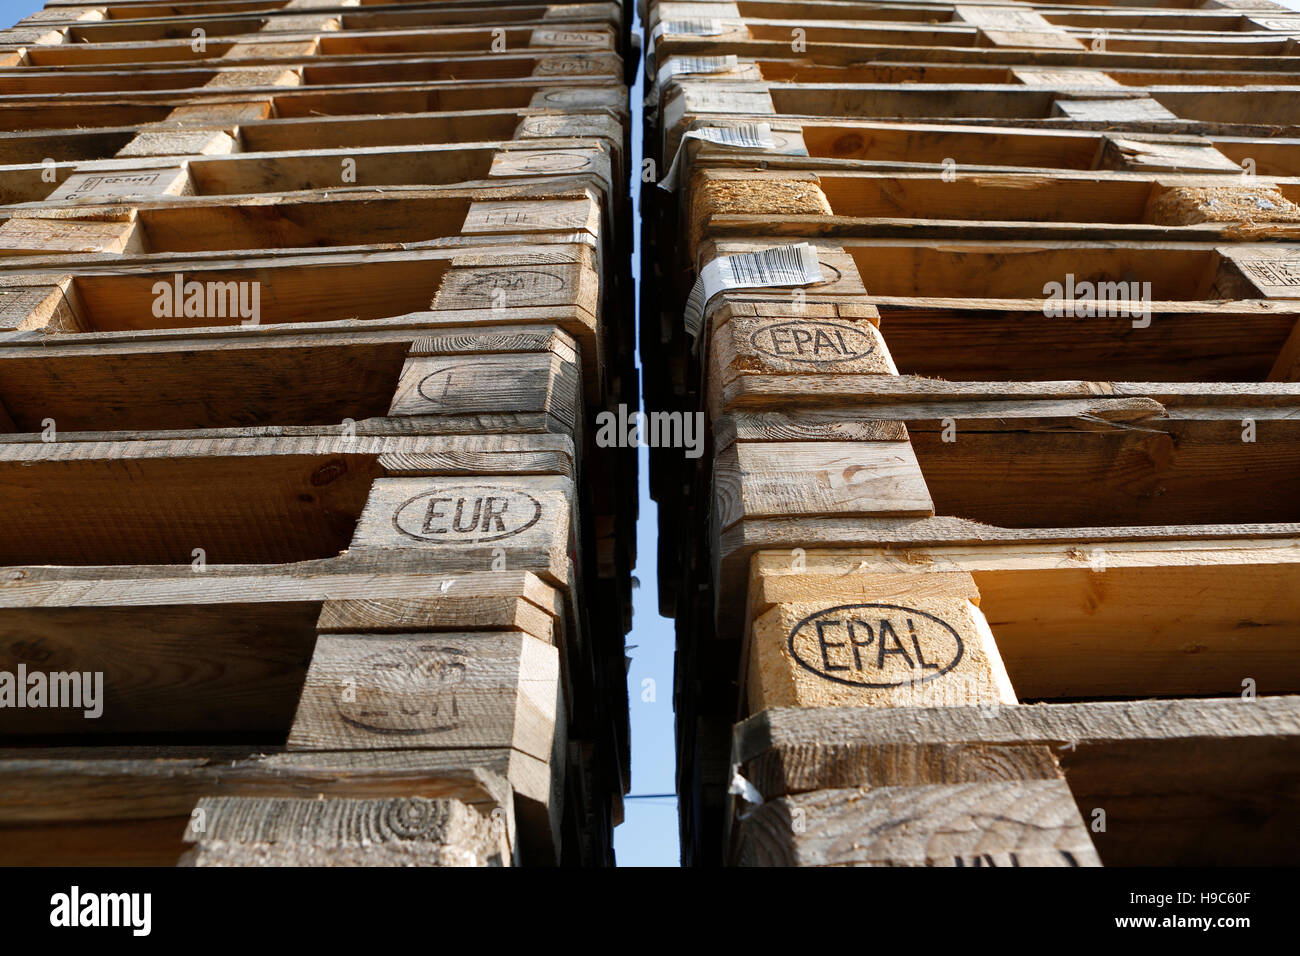 Construction, constructions, pallets, wooden pallets, wooden warehouses Stock Photo